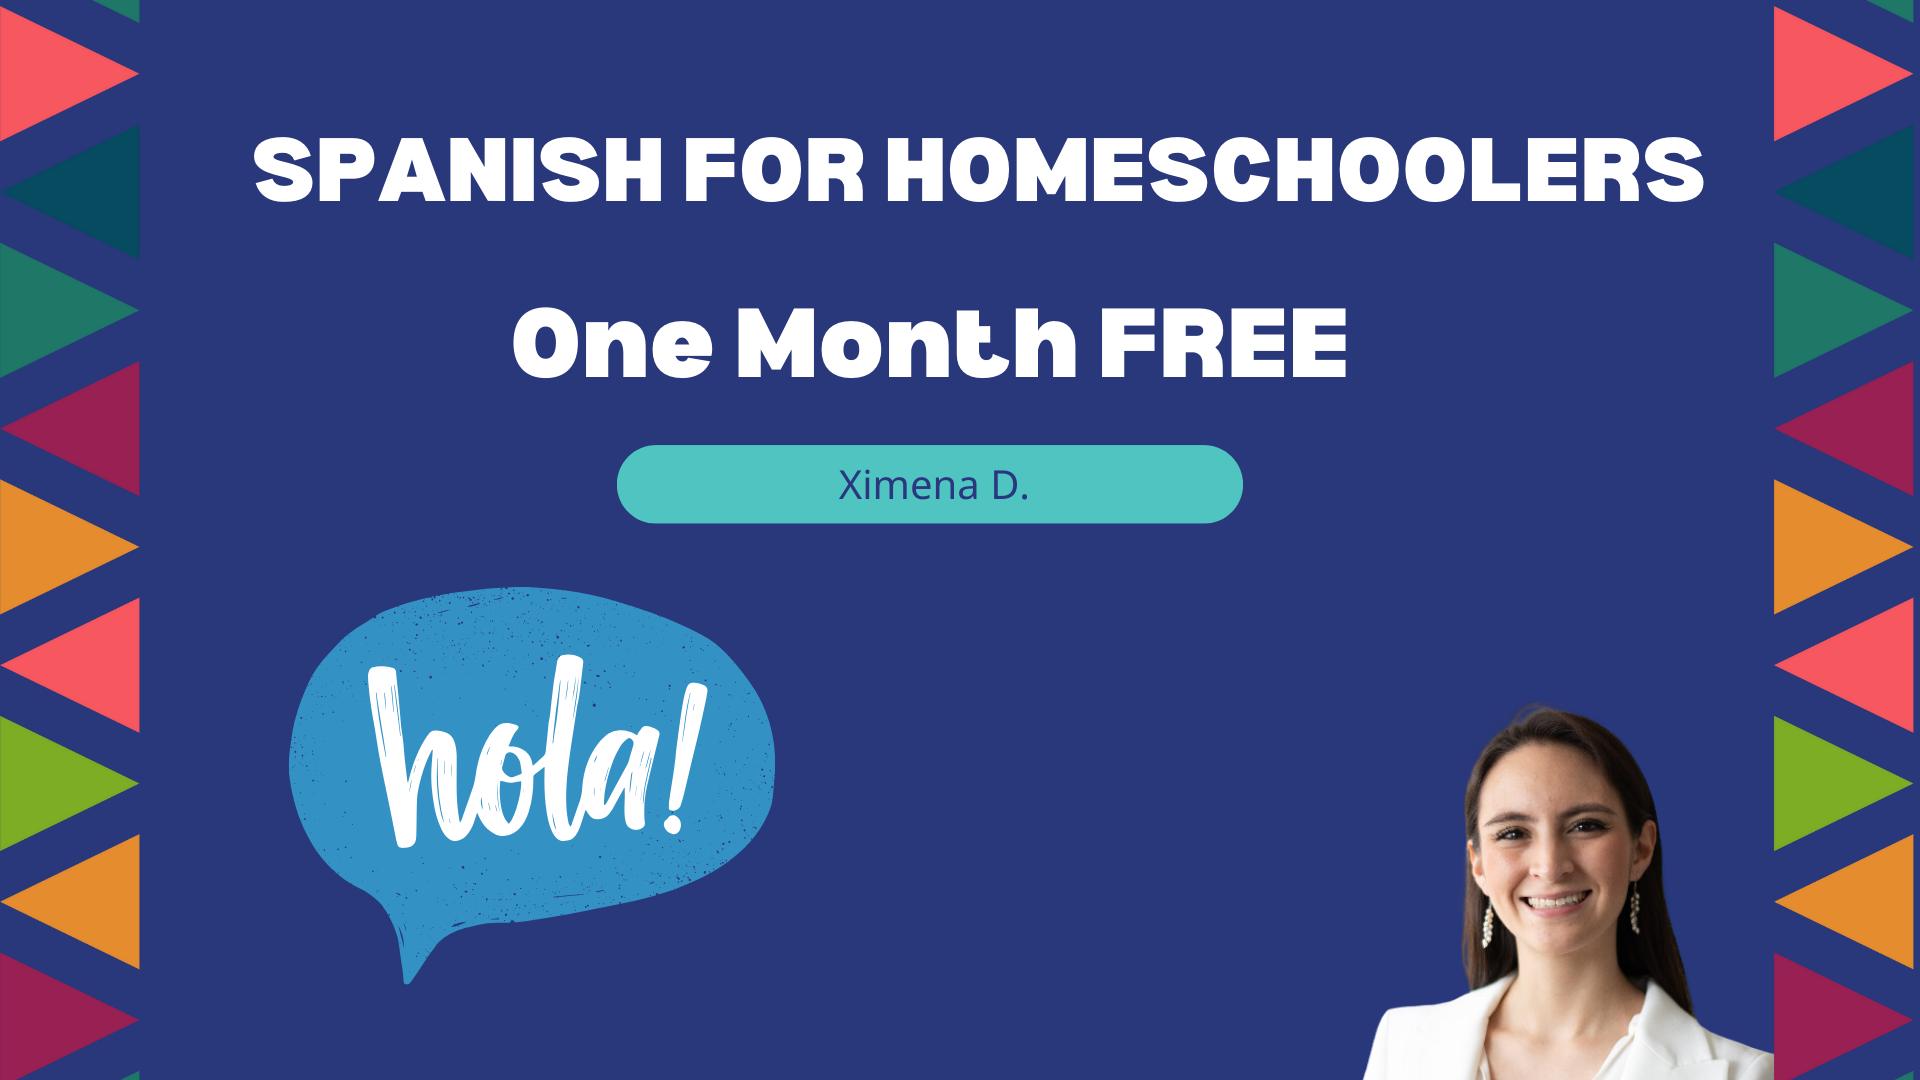 Spanish for Homeschoolers: One Month FREE